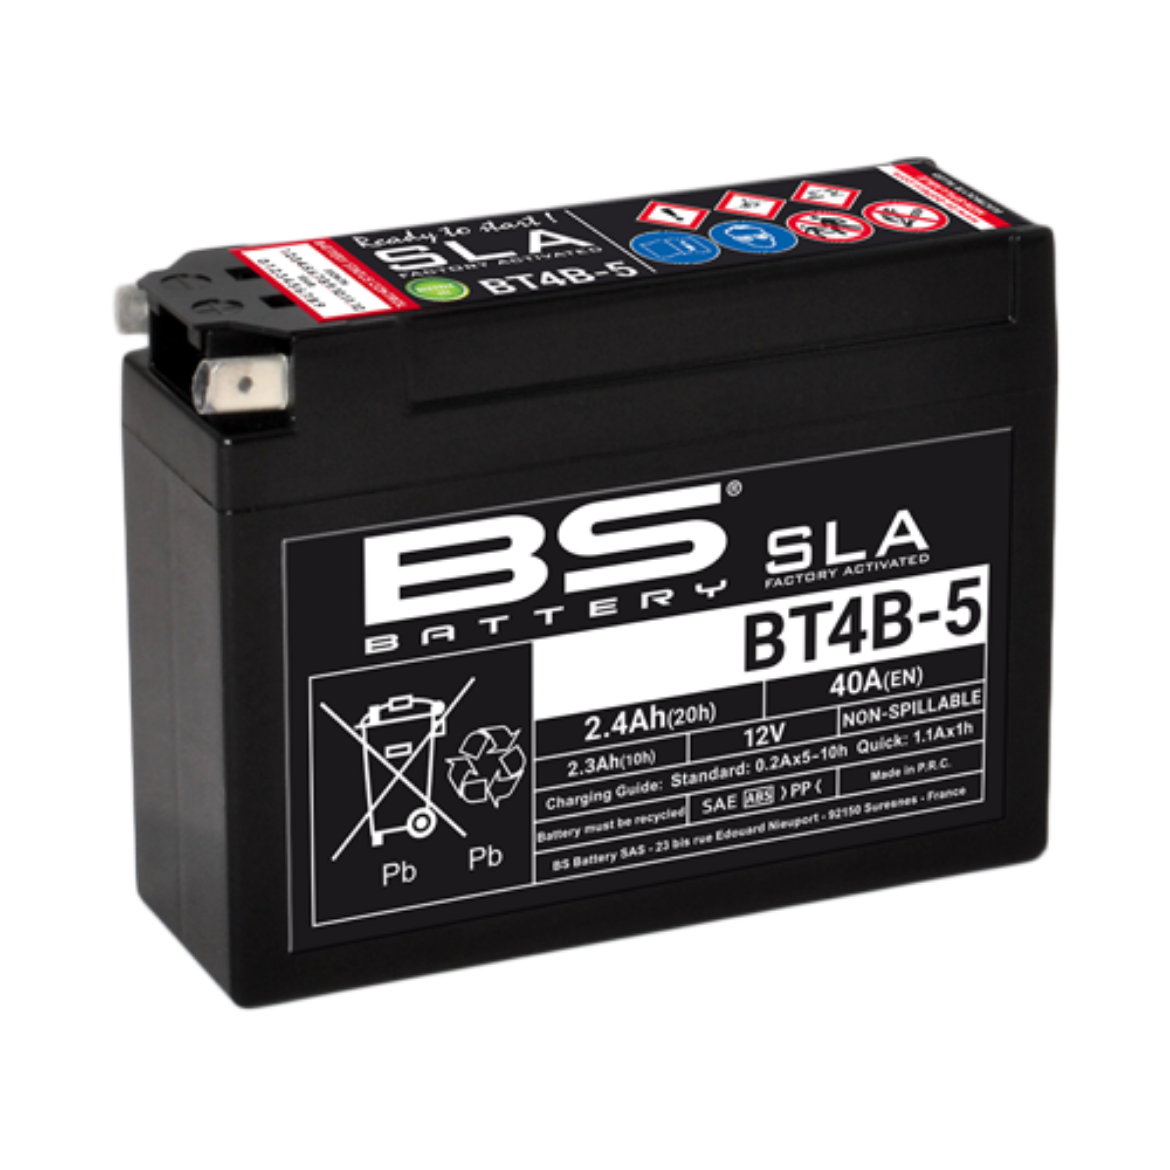 Picture of BT4B-5 12V 40CCA 2.3AH AGM SLA BS MOTORCYCLE BATTERY